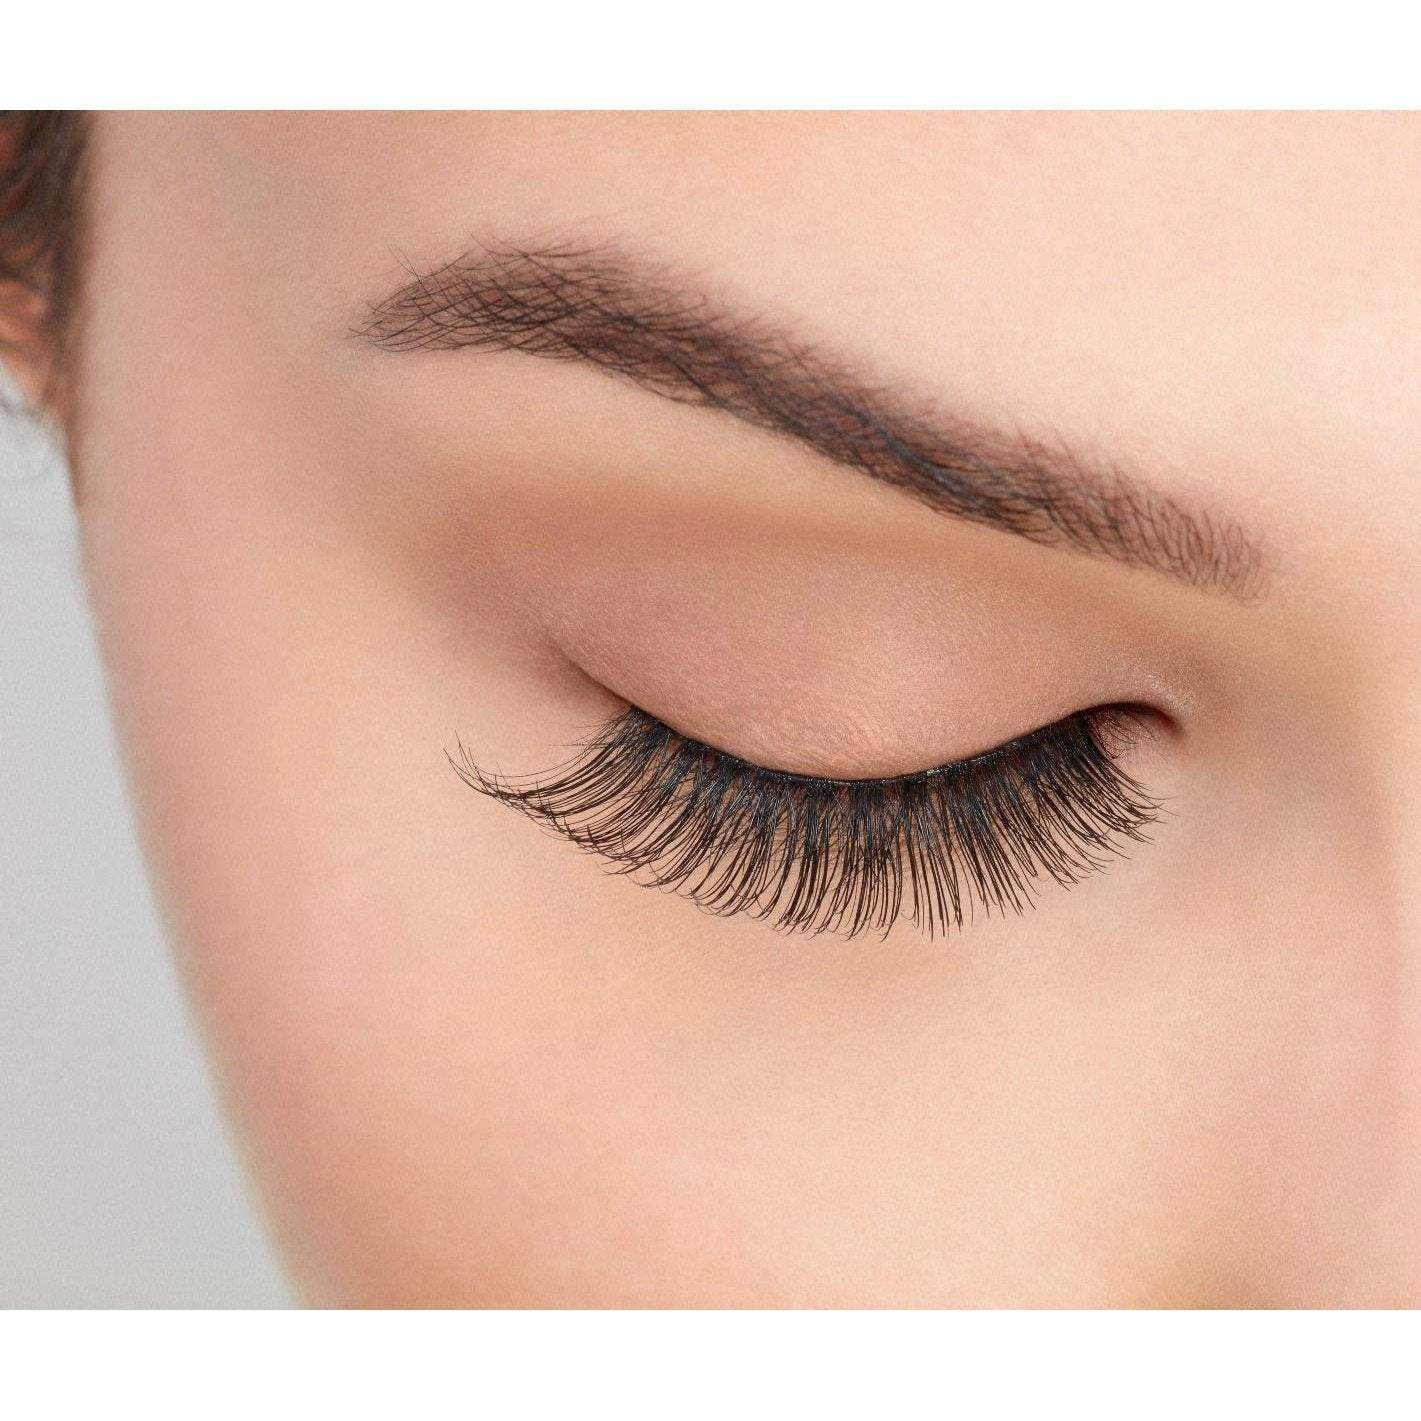 Ardell 111 Glamour Black Faux Lashes-Ardell-ARD_Natural,Brand_Ardell,Collection_Makeup,Makeup_Eye,Makeup_Faux Lashes